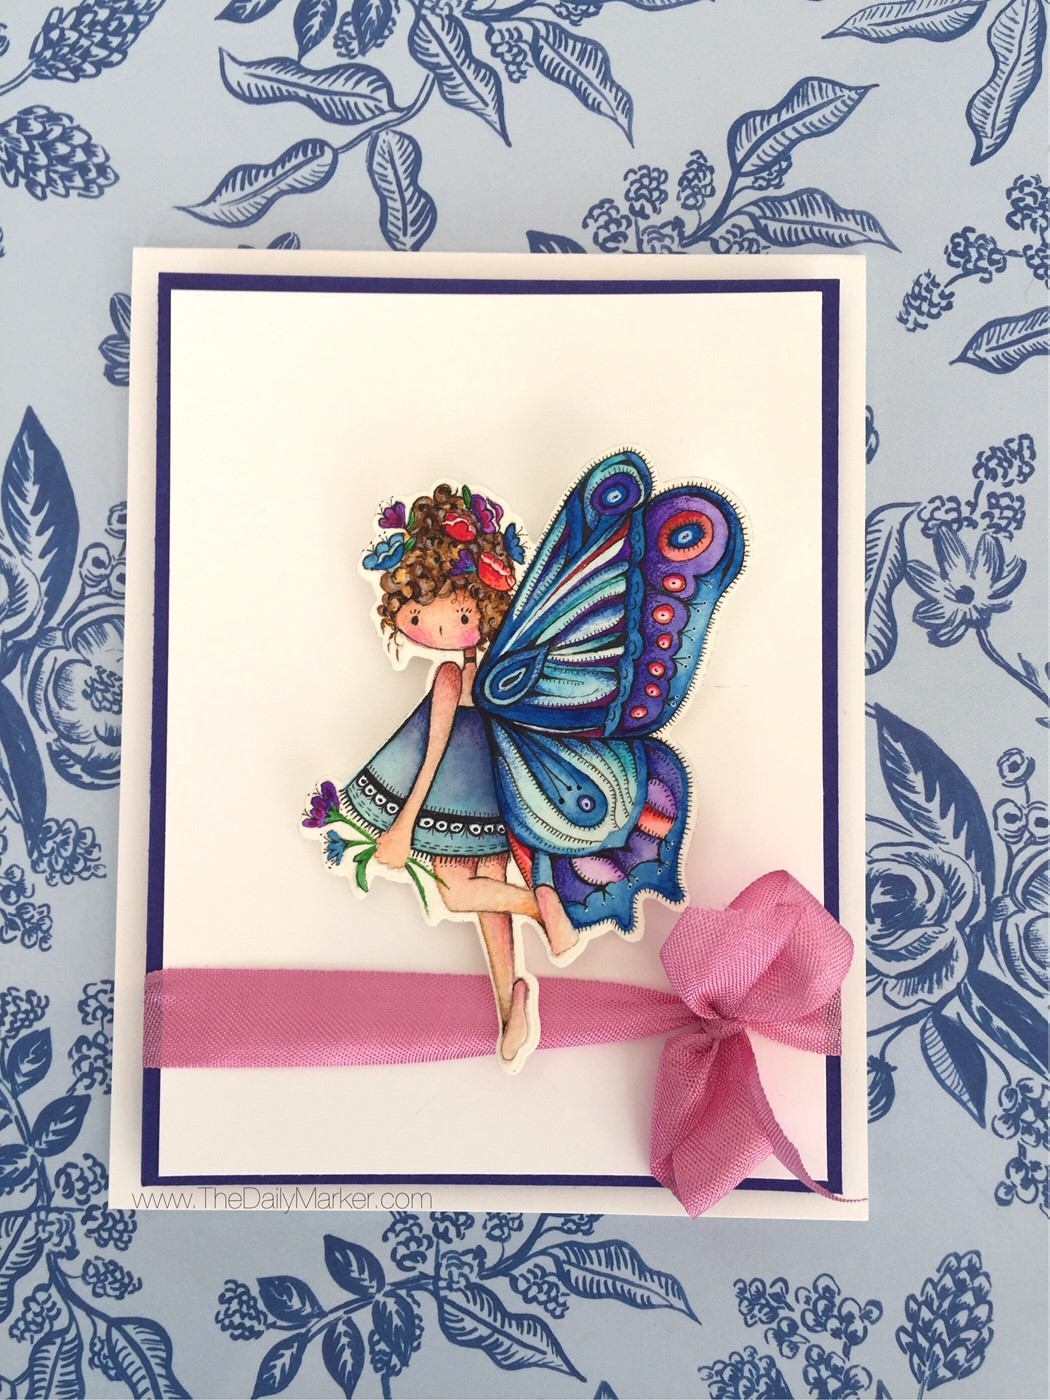 www.stampingbella.com: rubber stamp used: Tiny Townie Butterfly Girl BRIANNA card by Kathy Racoosin